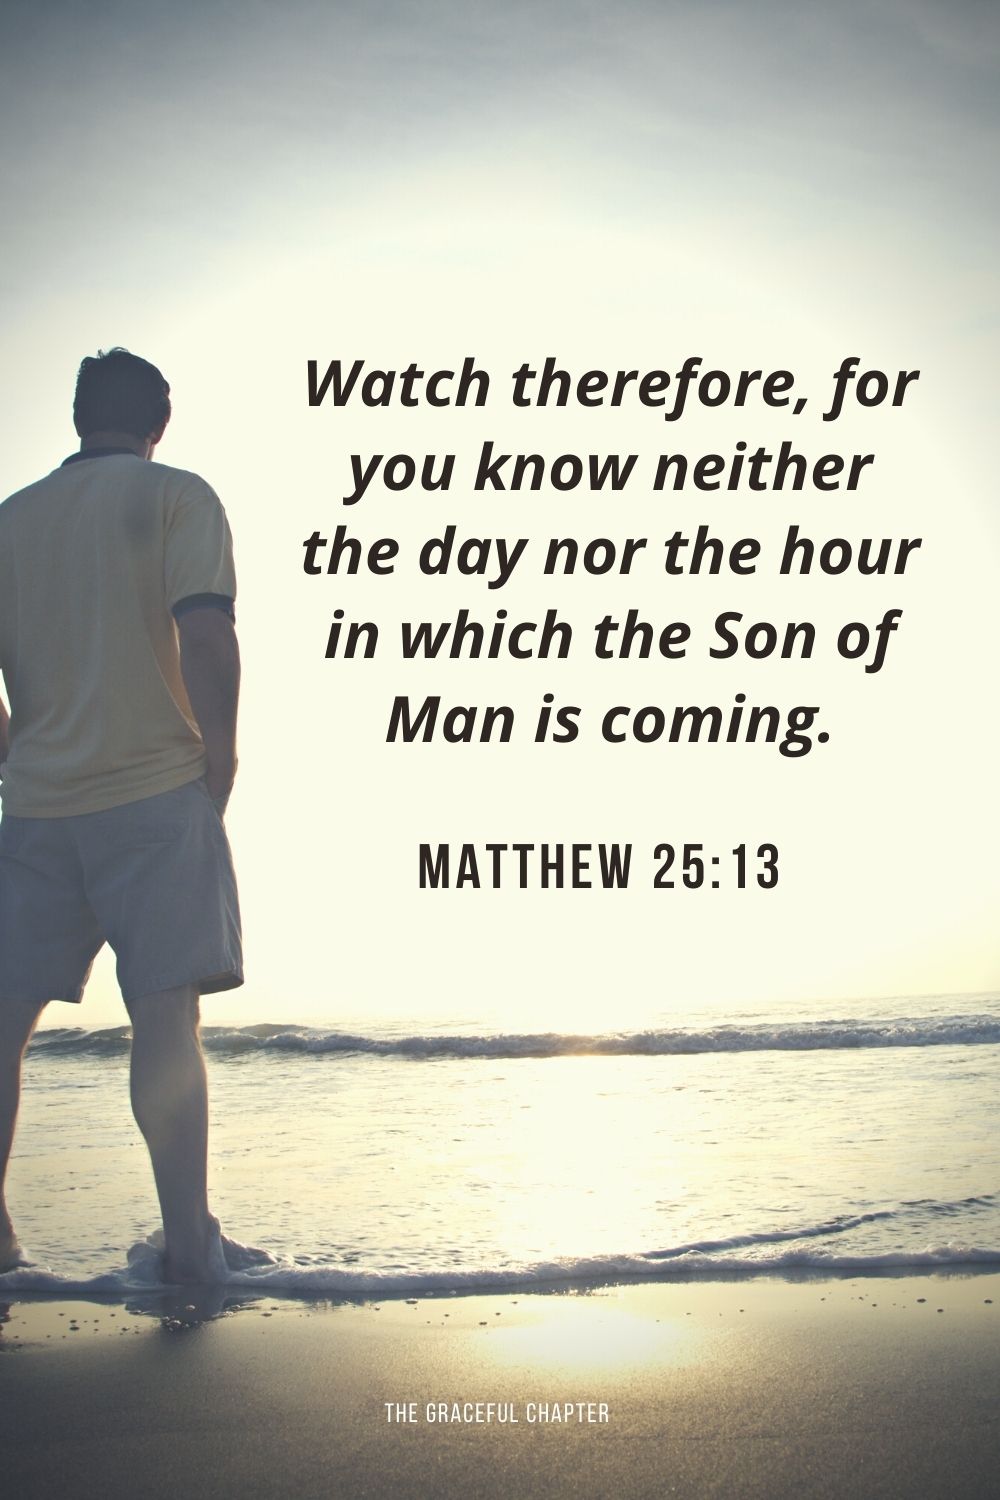 Watch therefore, for you know neither the day nor the hour in which the Son of Man is coming. Matthew 25:13